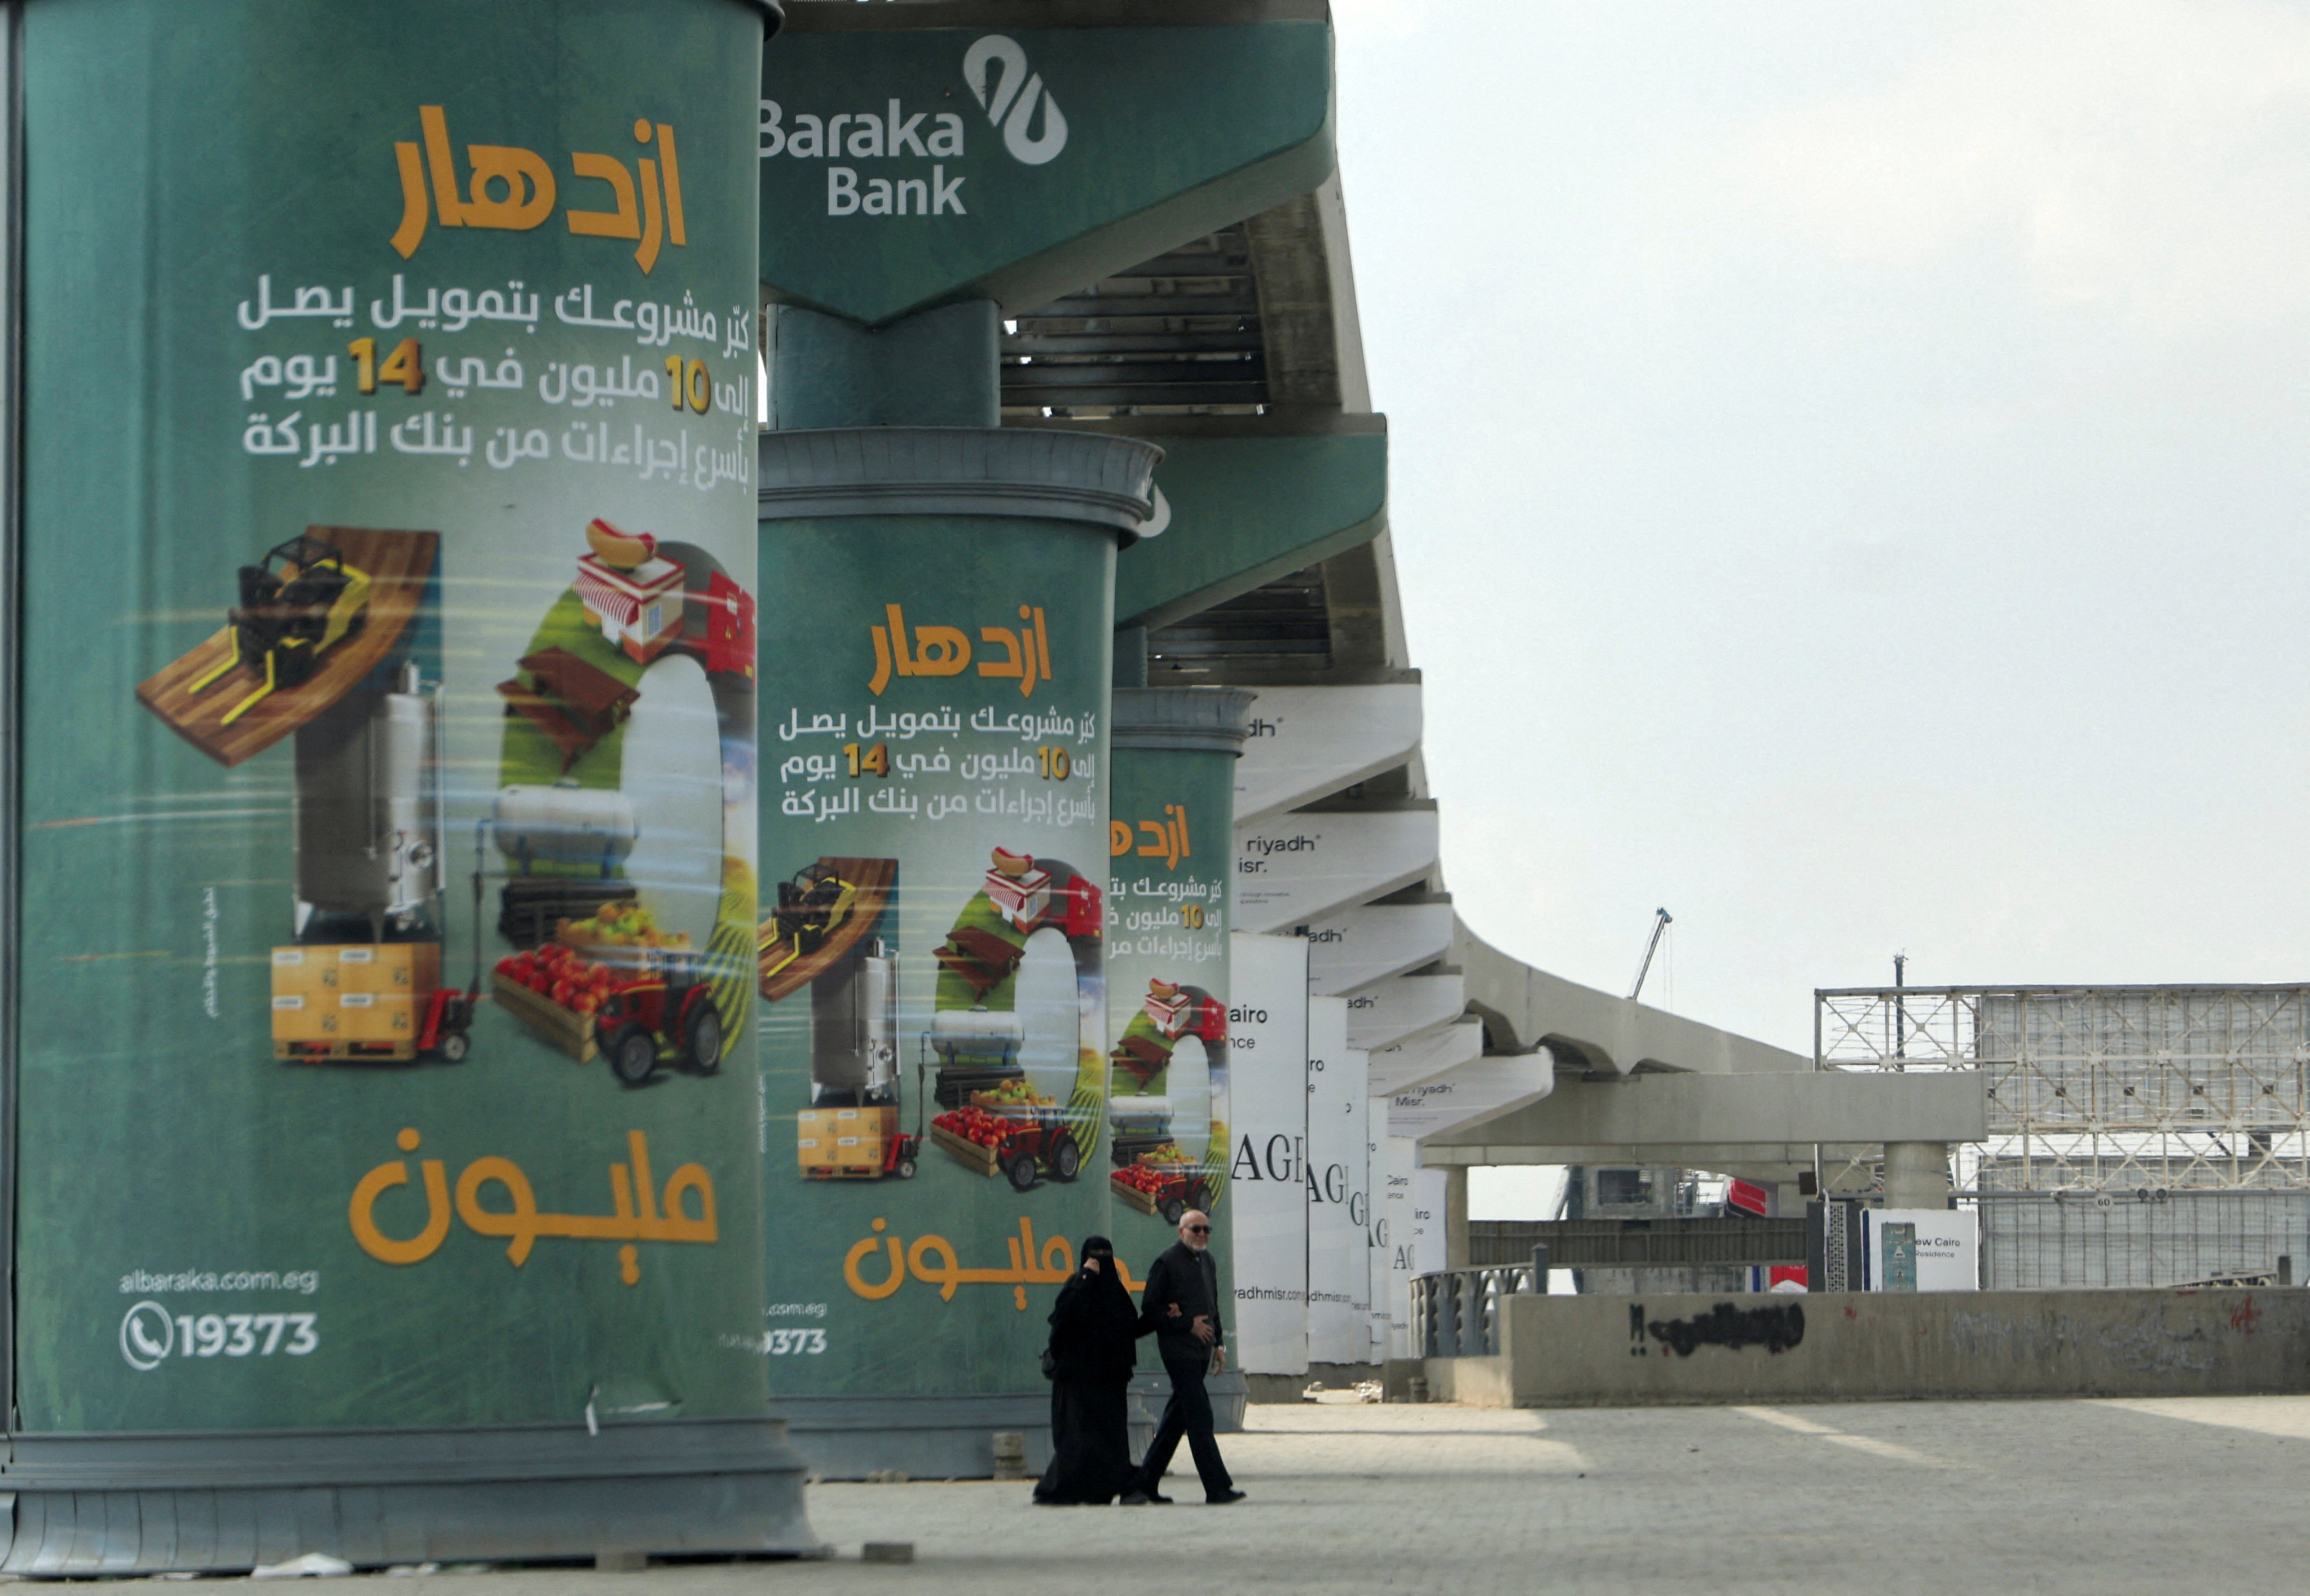 An Egyptian couple walks next to advertising credit investment certificates by a branch of Al Baraka Bank on walls of a new monorail line in Cairo, Egypt, on March 7. Photo: Reuters